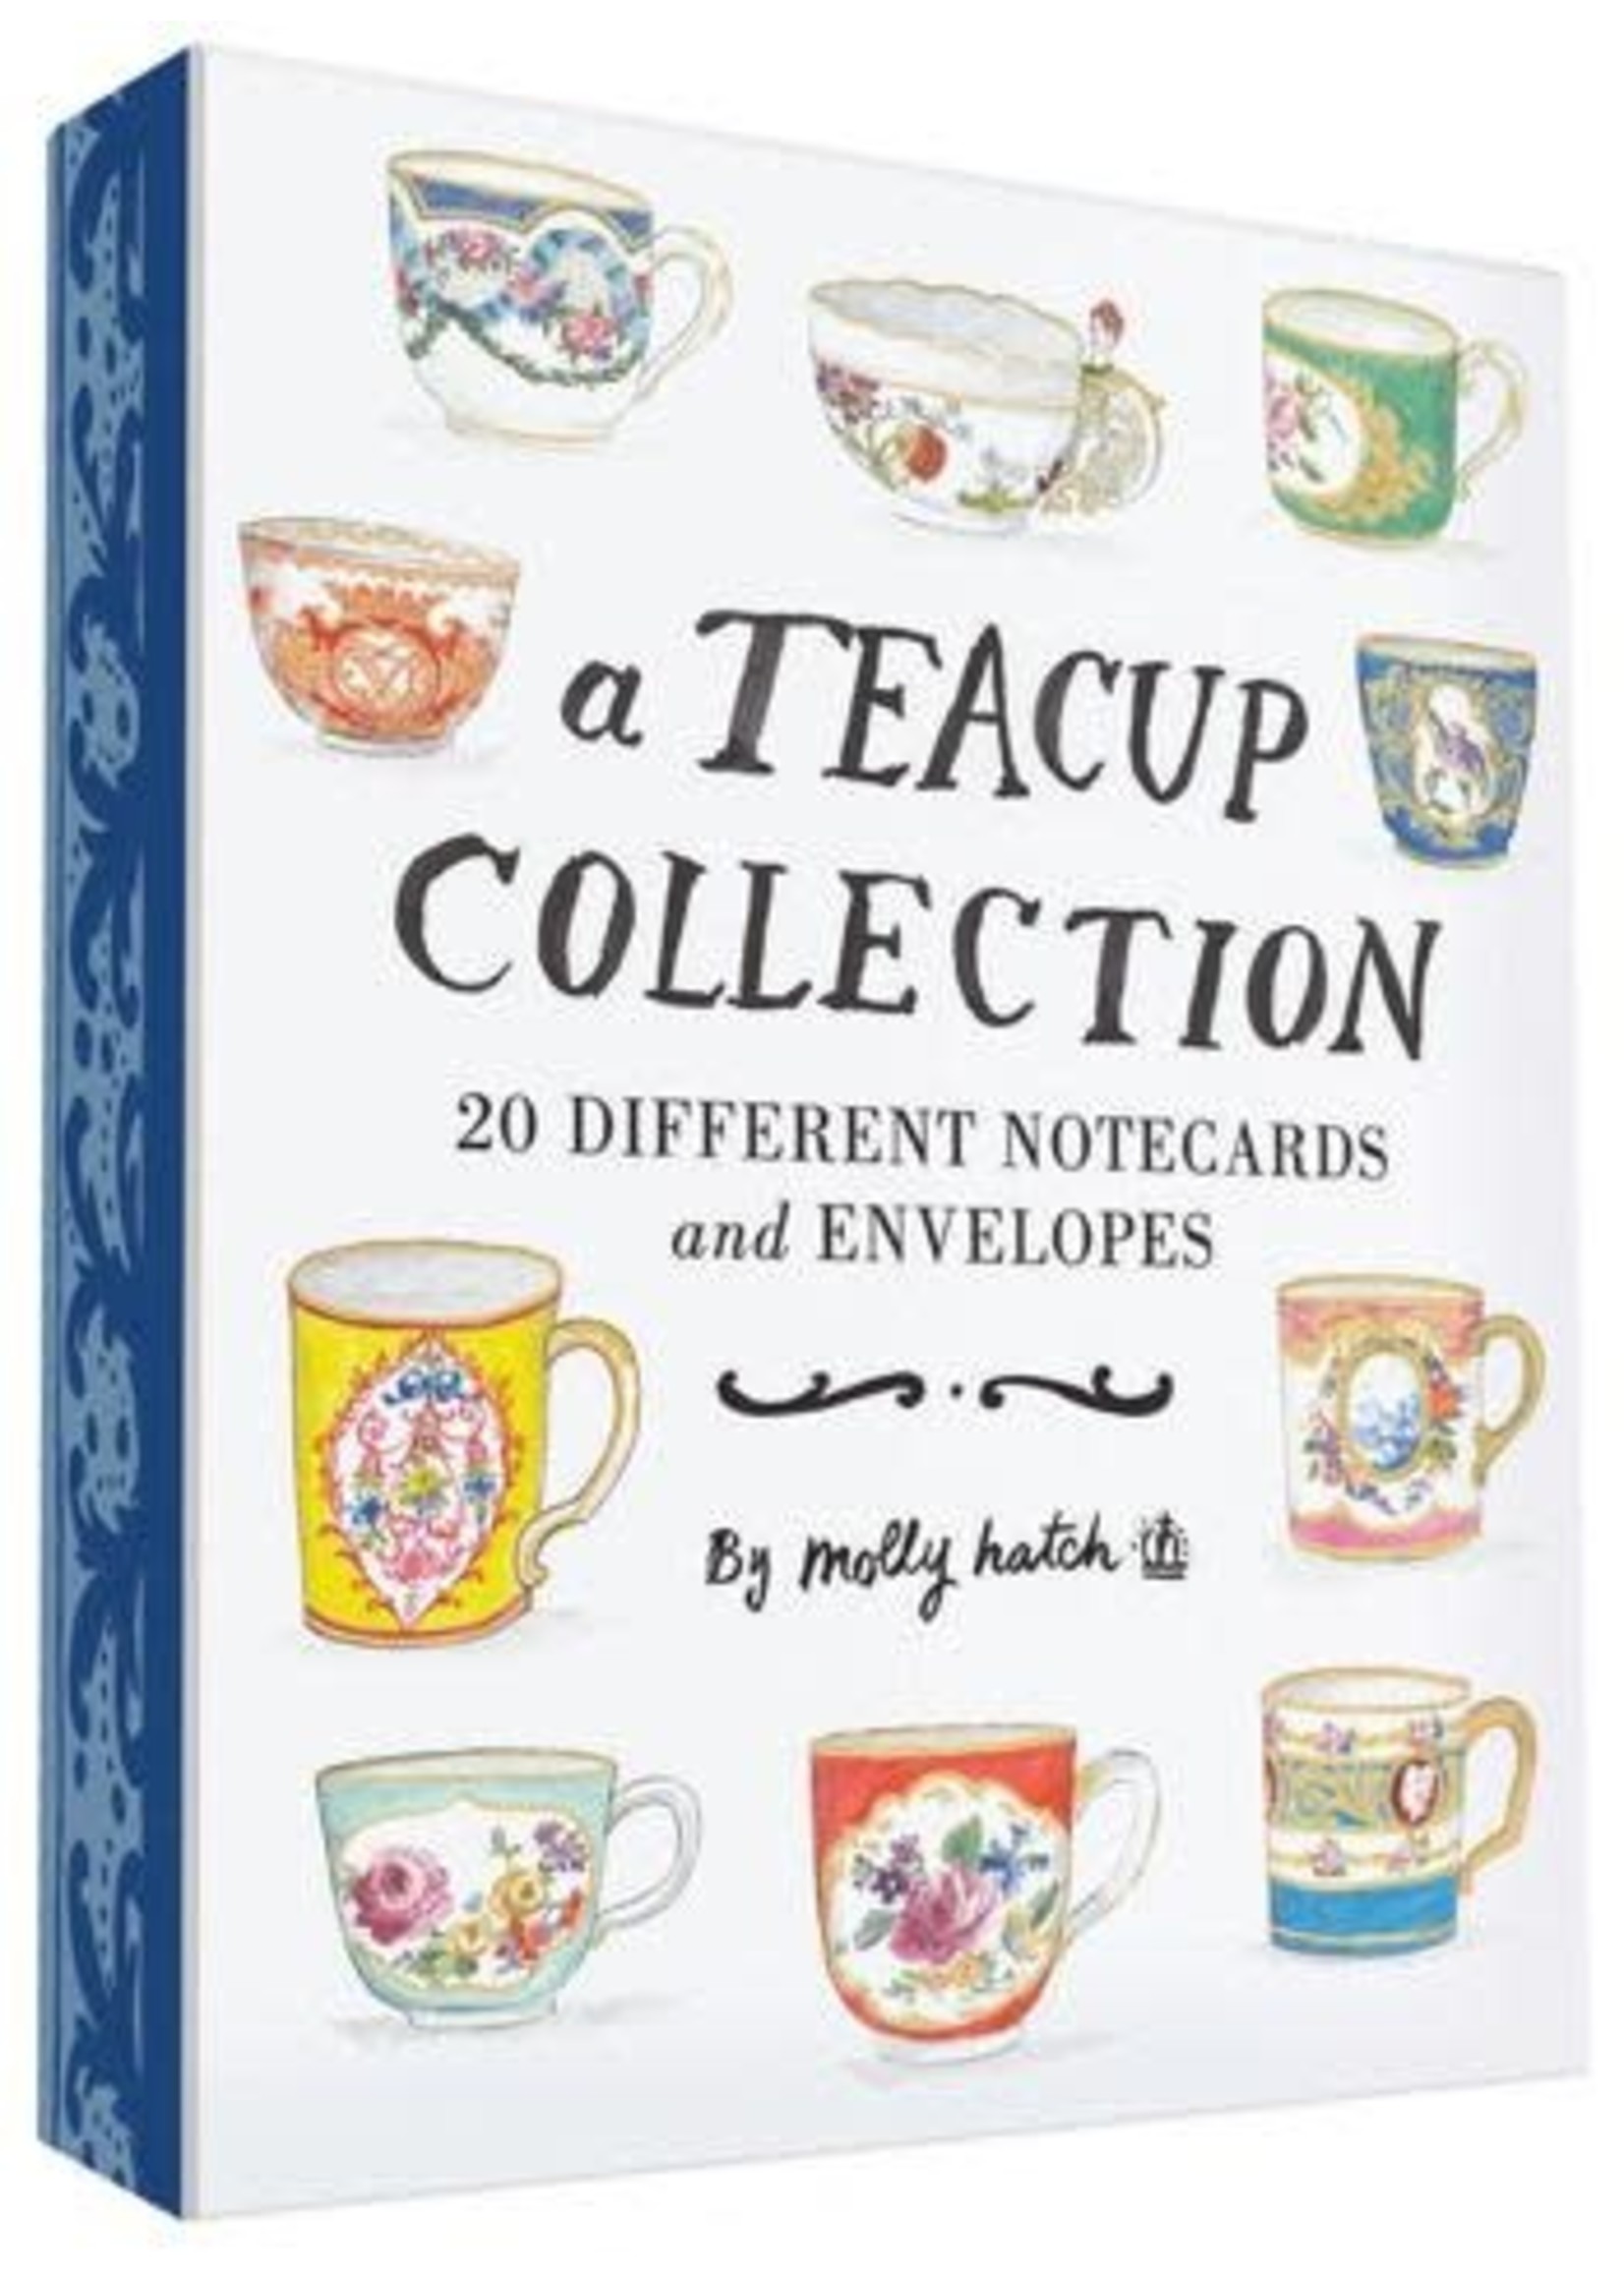 A Teacup Collection Notes: 20 Different Notecards and Envelopes by Molly Hatch